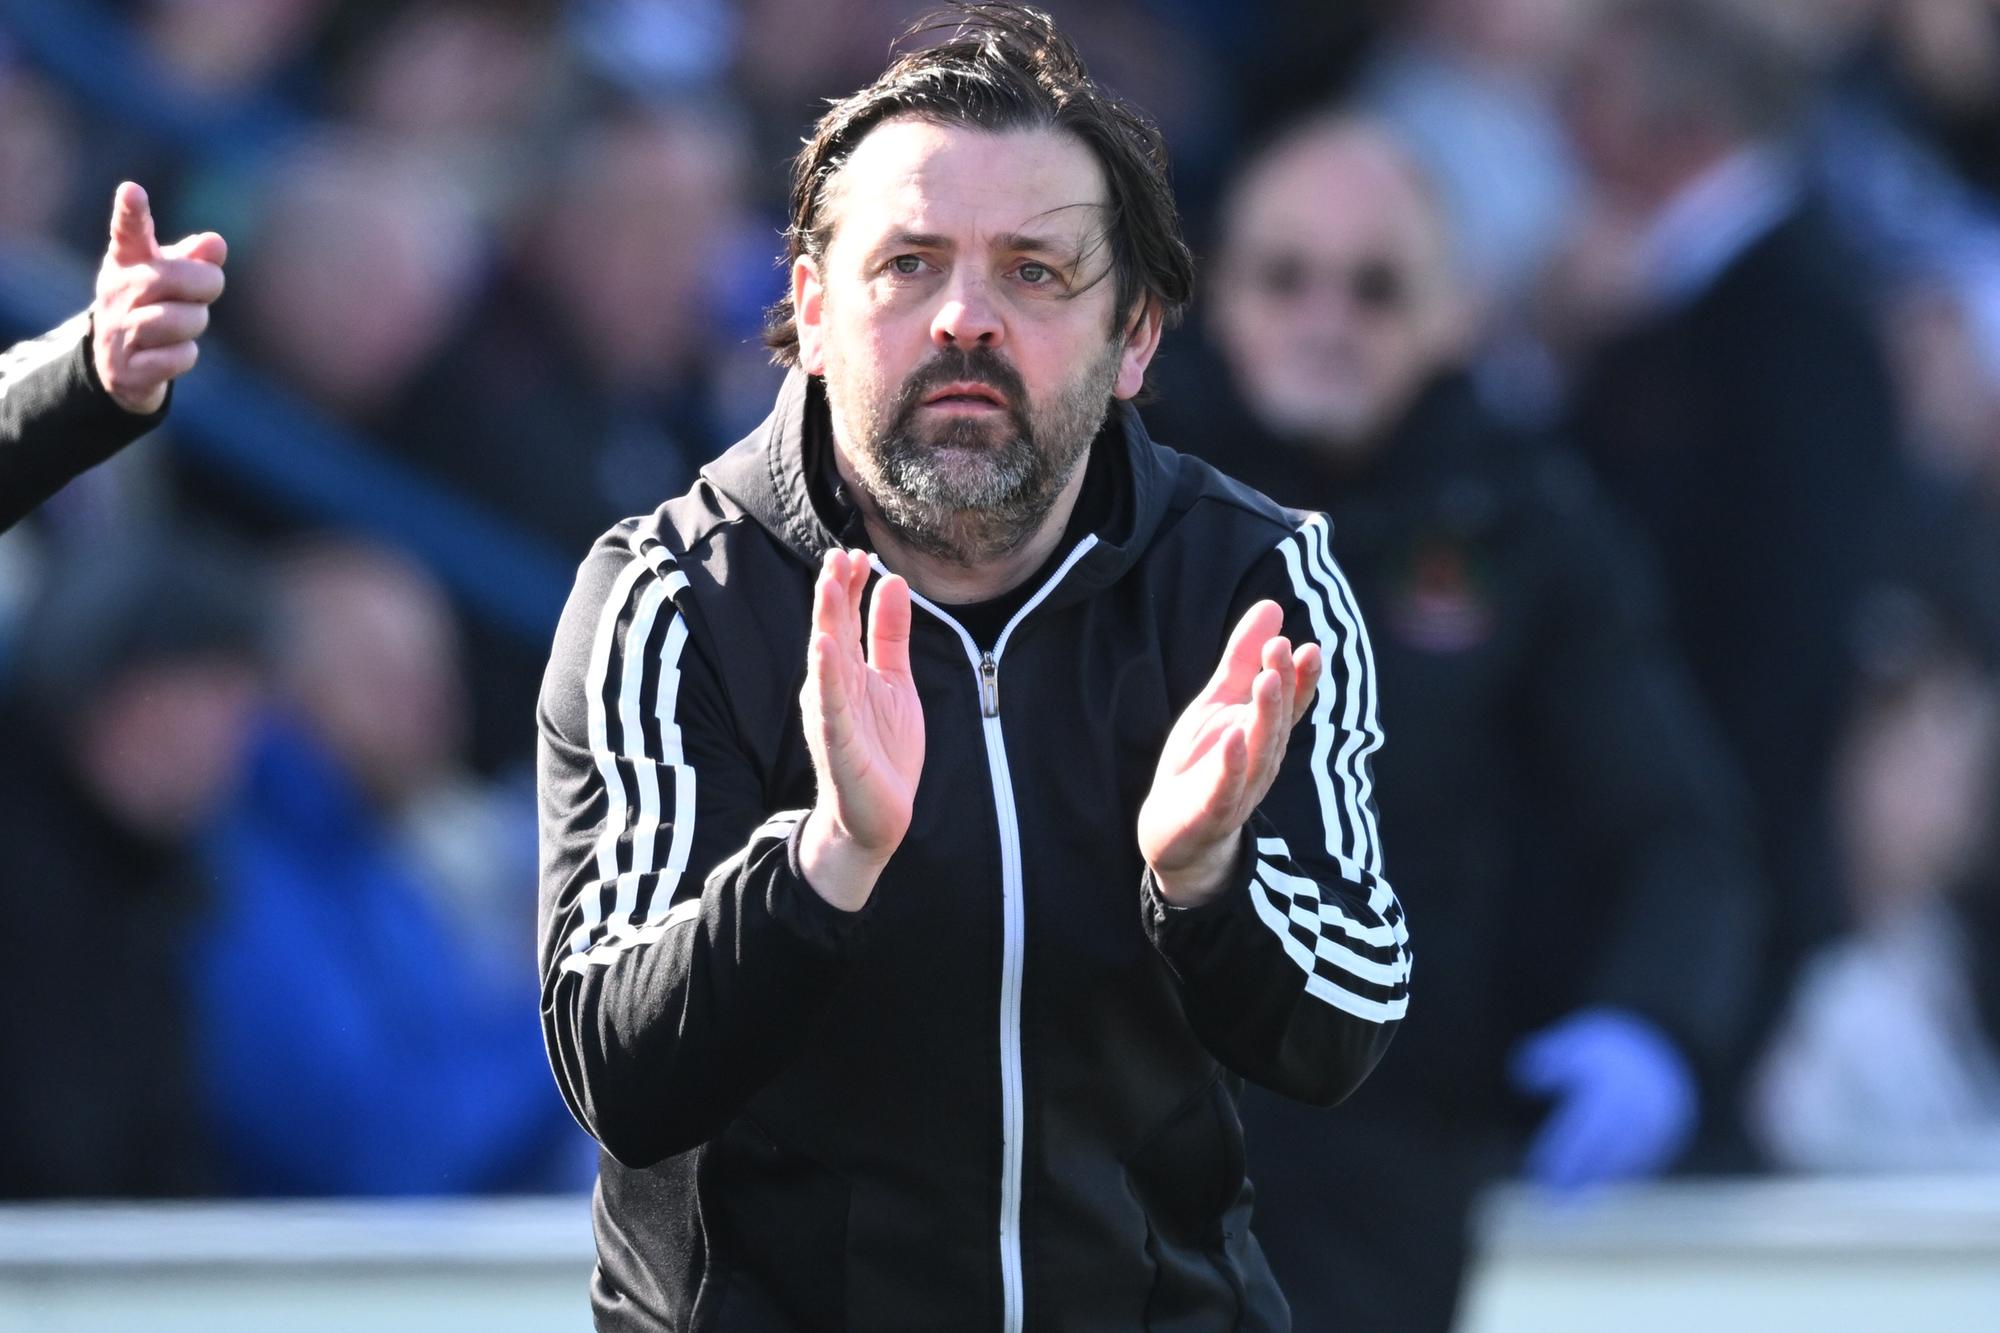 Paul Hartley back in Scottish football with return to former club following Hartlepool sacking